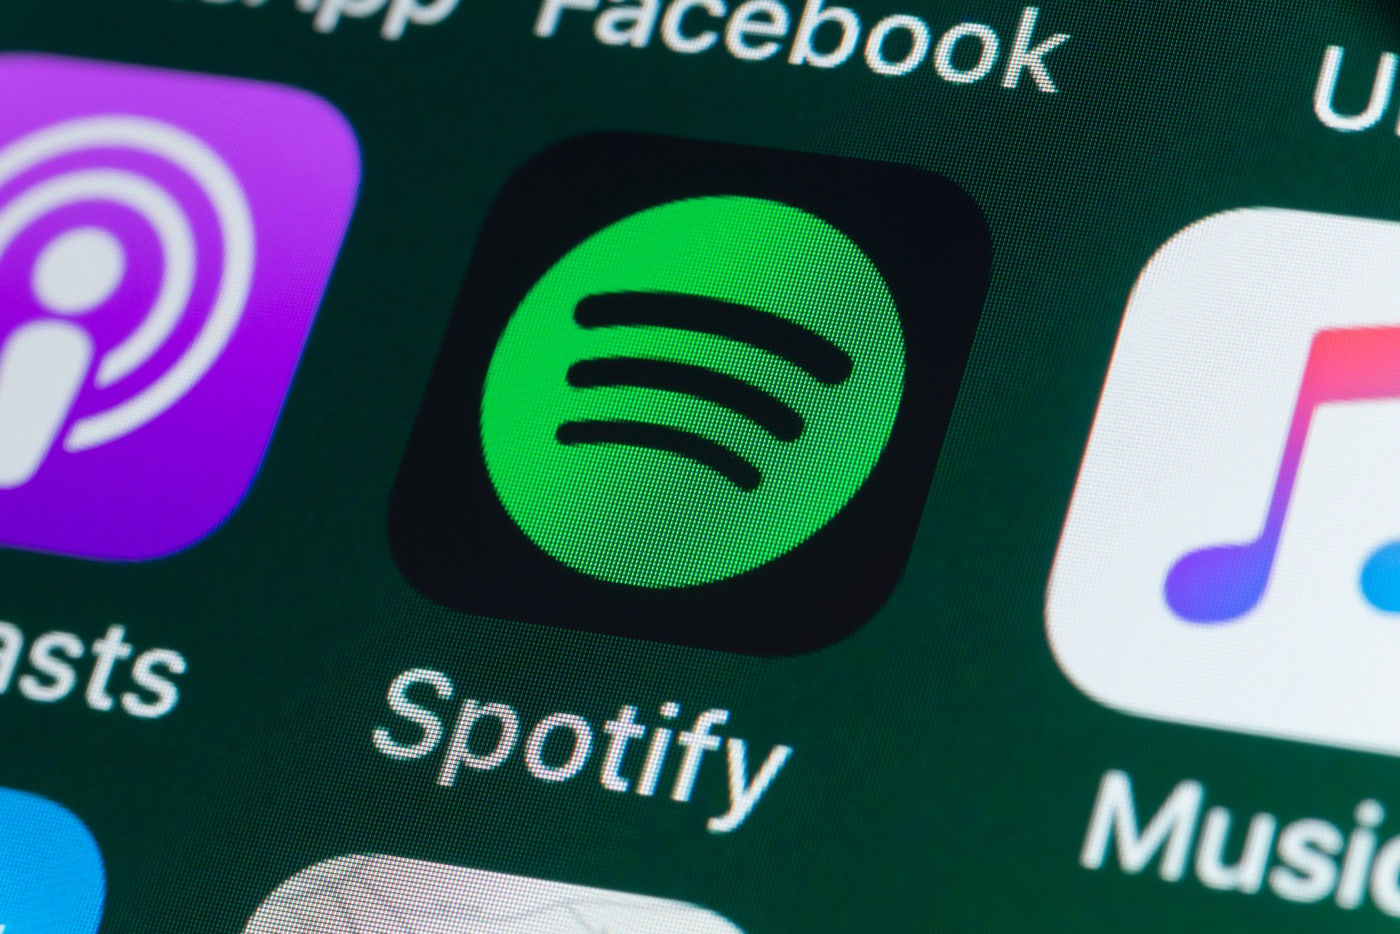 Spotify will support Apple’s HealthKit for sports playlists